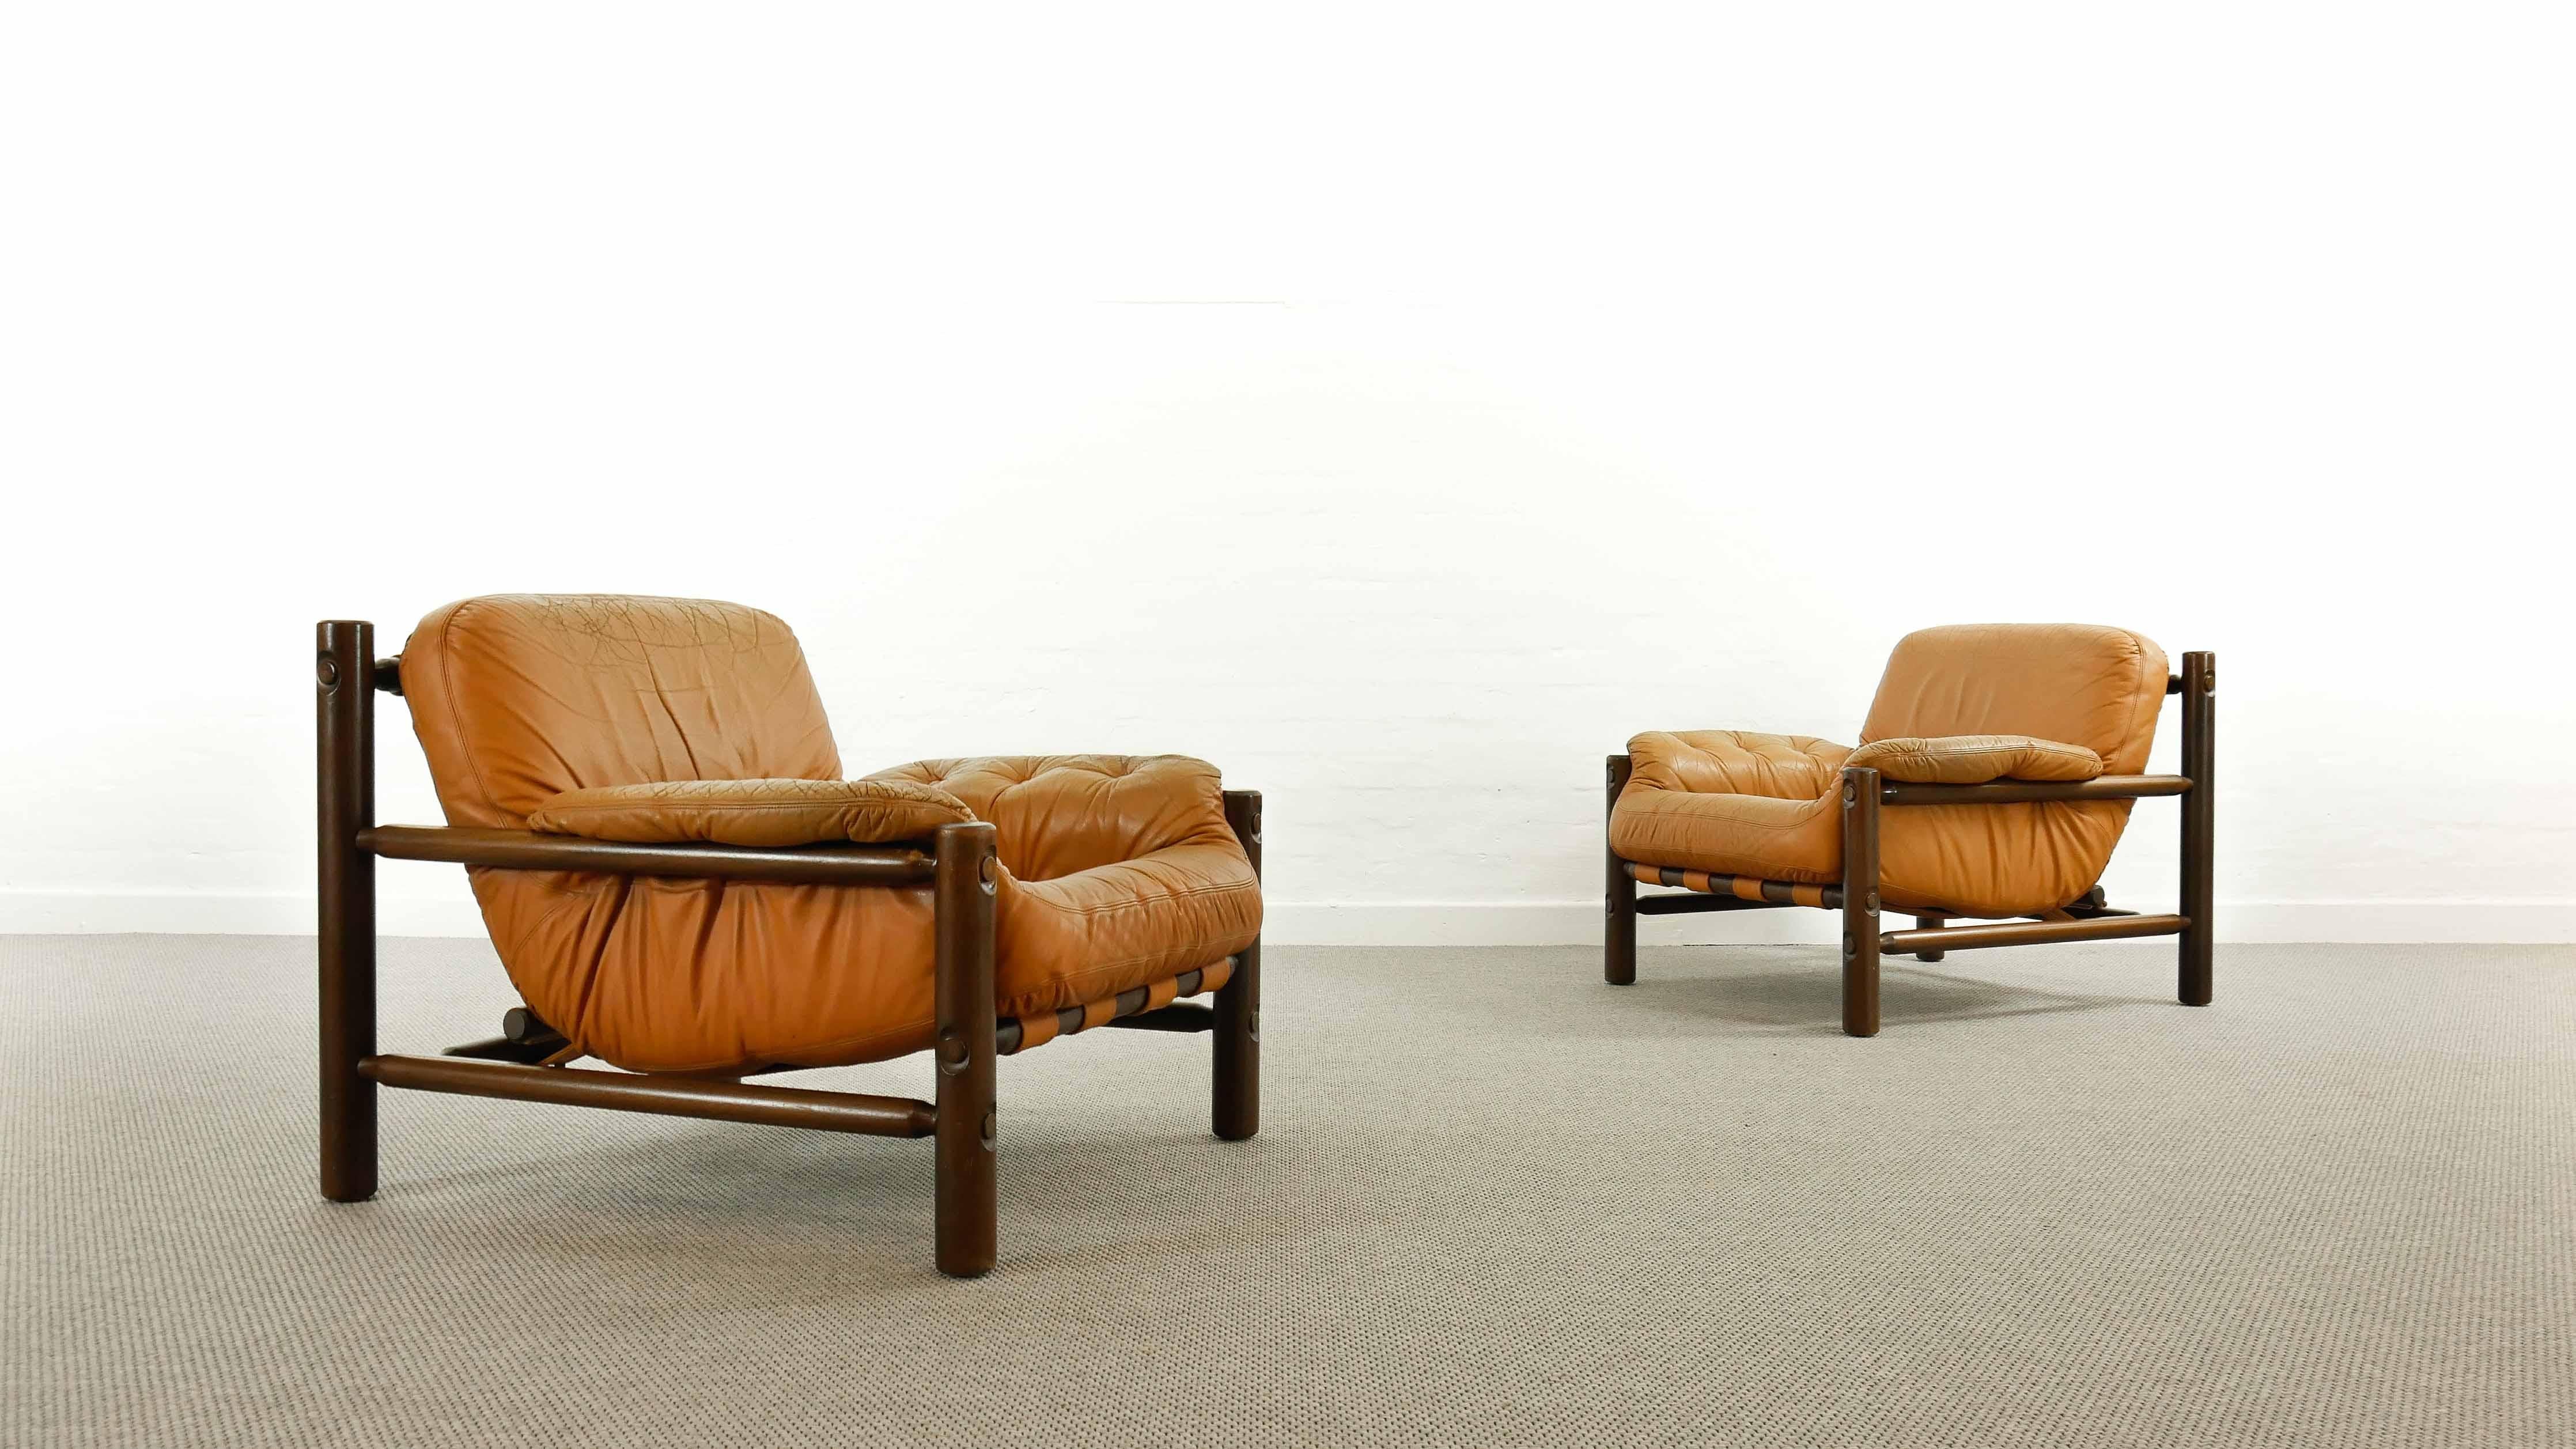 Beautiful pair of lounge chairs Brazilian style from the late 1960s-early 1970s.Cognac colored leather with a beautiful patina. Very elegant and comfortable armchairs in good vintage condition. Buttoned leather upholstery mounted by belts and belt